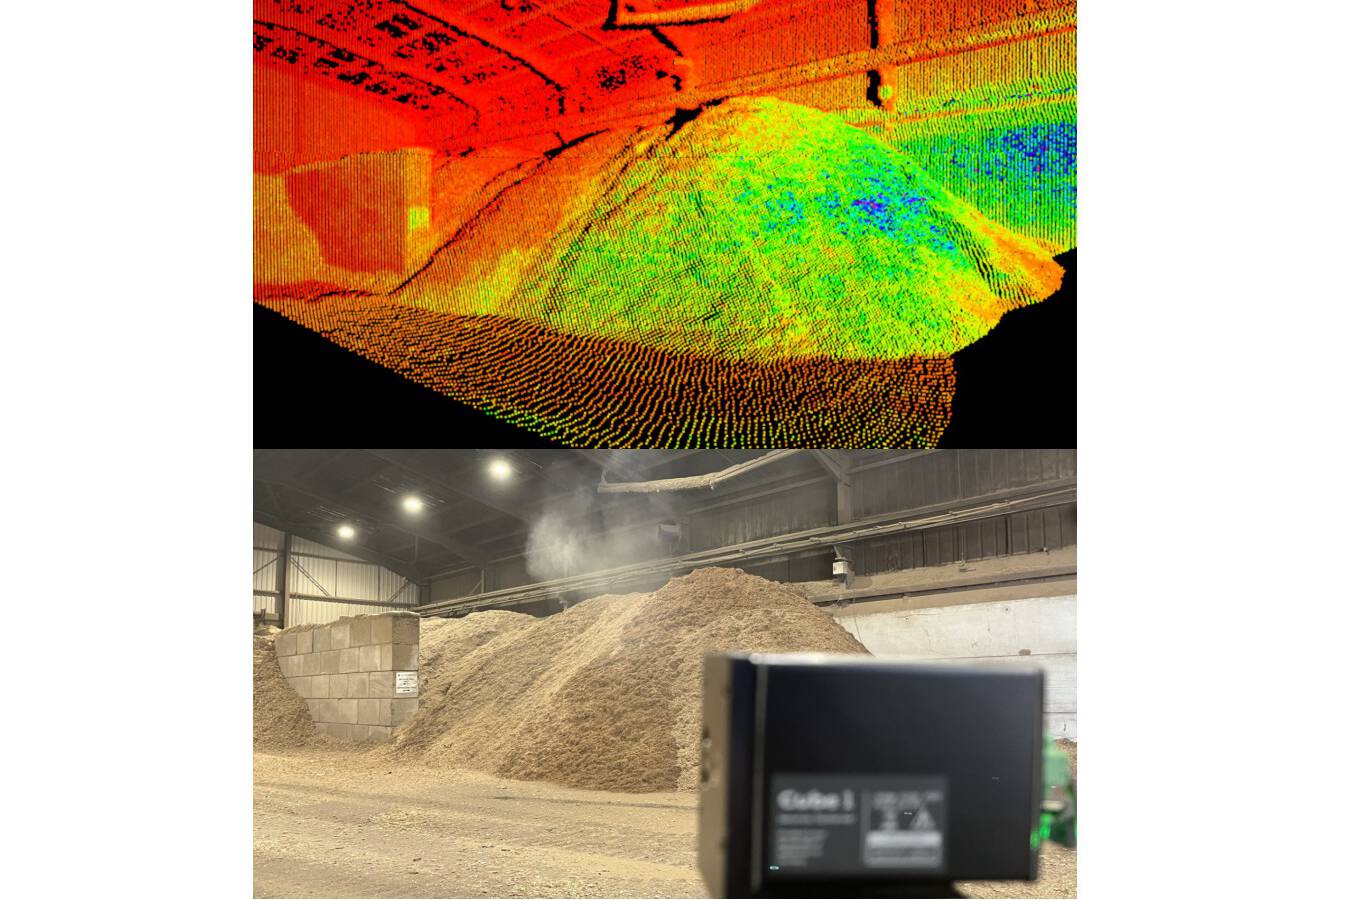 With Blickfeld’s LiDAR-based volume measurement solution, up-to-date inventory data is now automatically available for supply chain planning at any time.